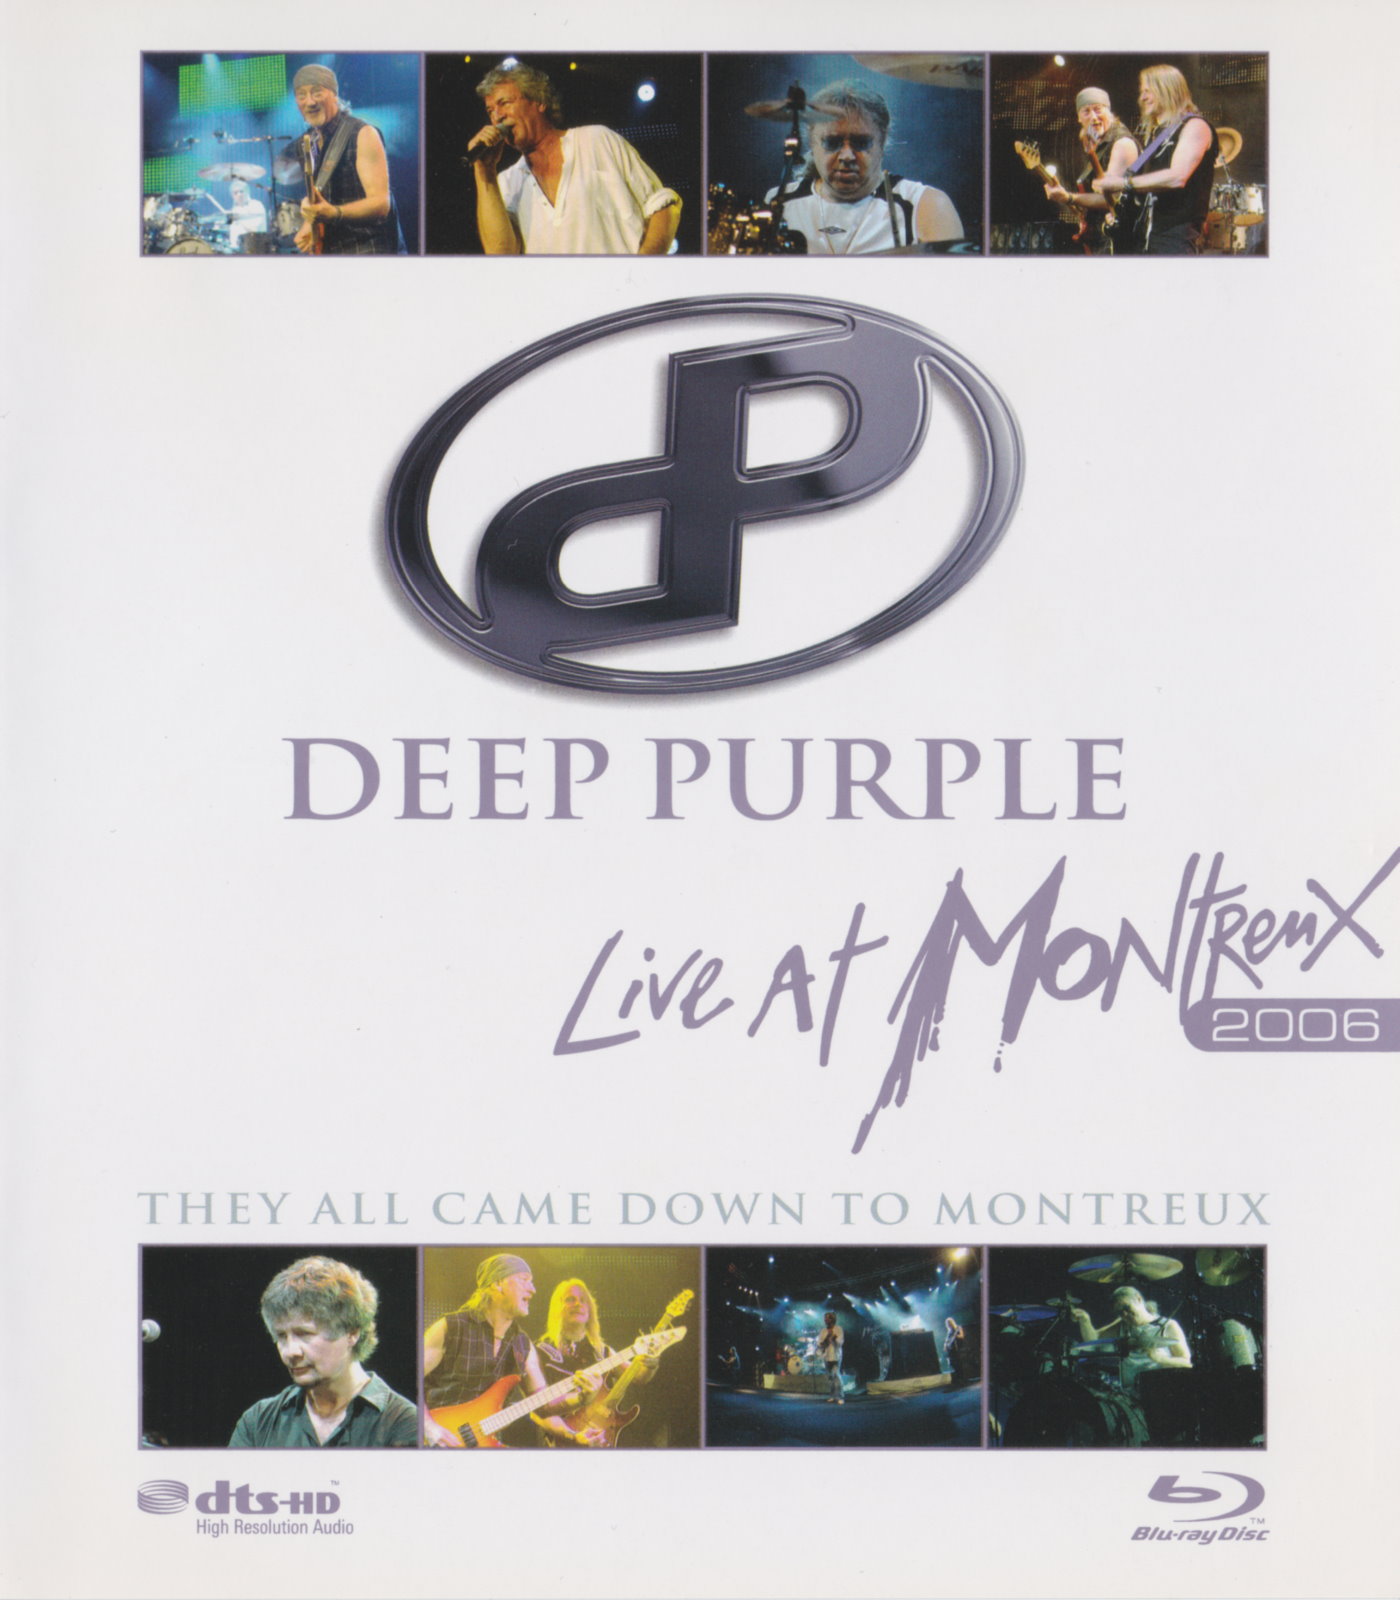 Cover - Deep Purple - They All Came Down to Montreux - Live at Montreux 2006.jpg